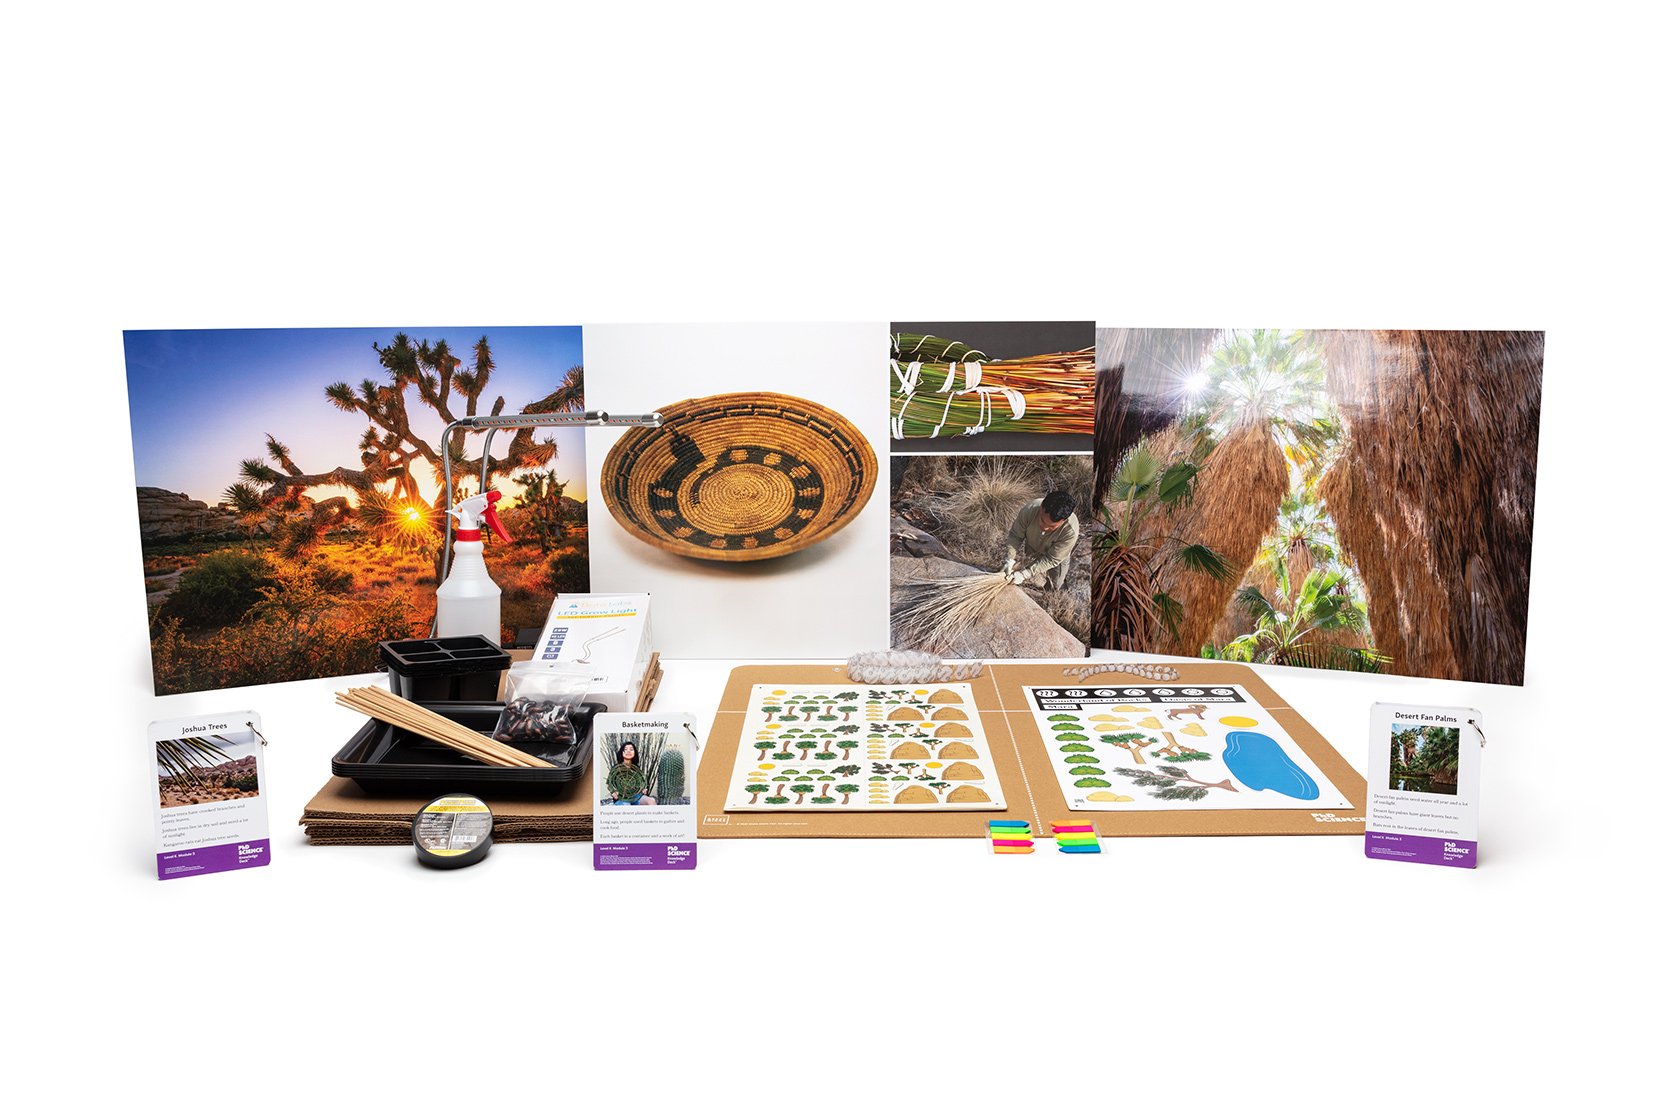 PhD Science hands-on materials kit from Level K Module 3 that includes a physical anchor model, Knowledge Deck cards and posters, and plant containers